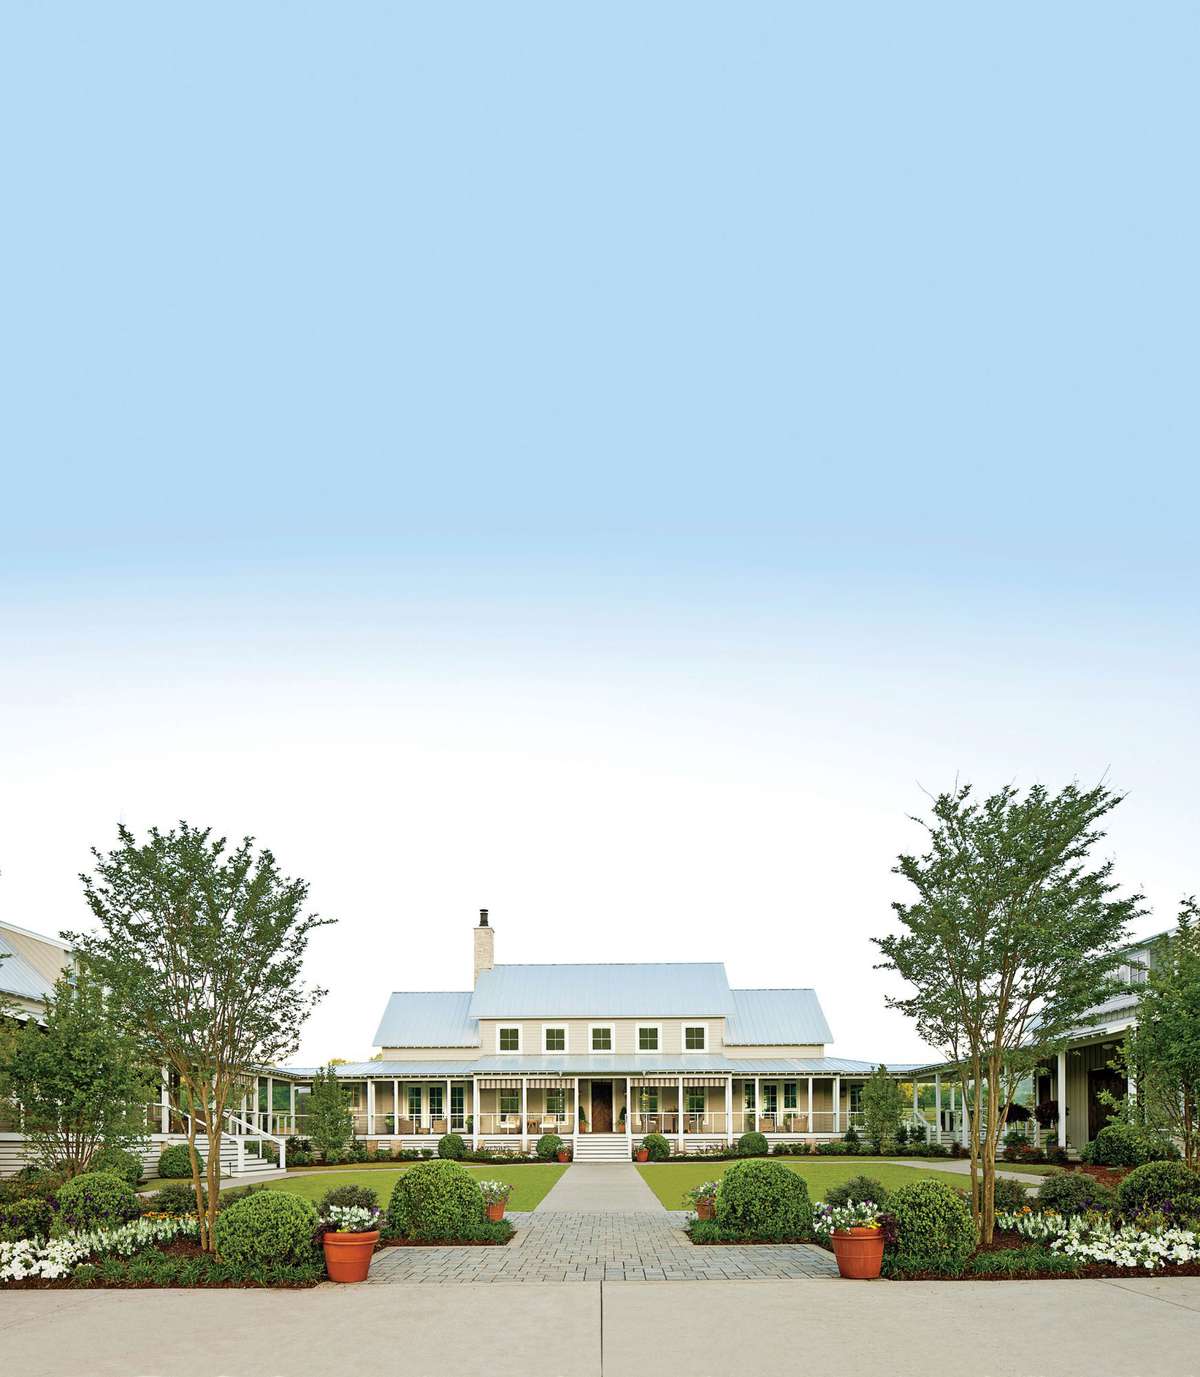 Traditional Southern Farmhouse